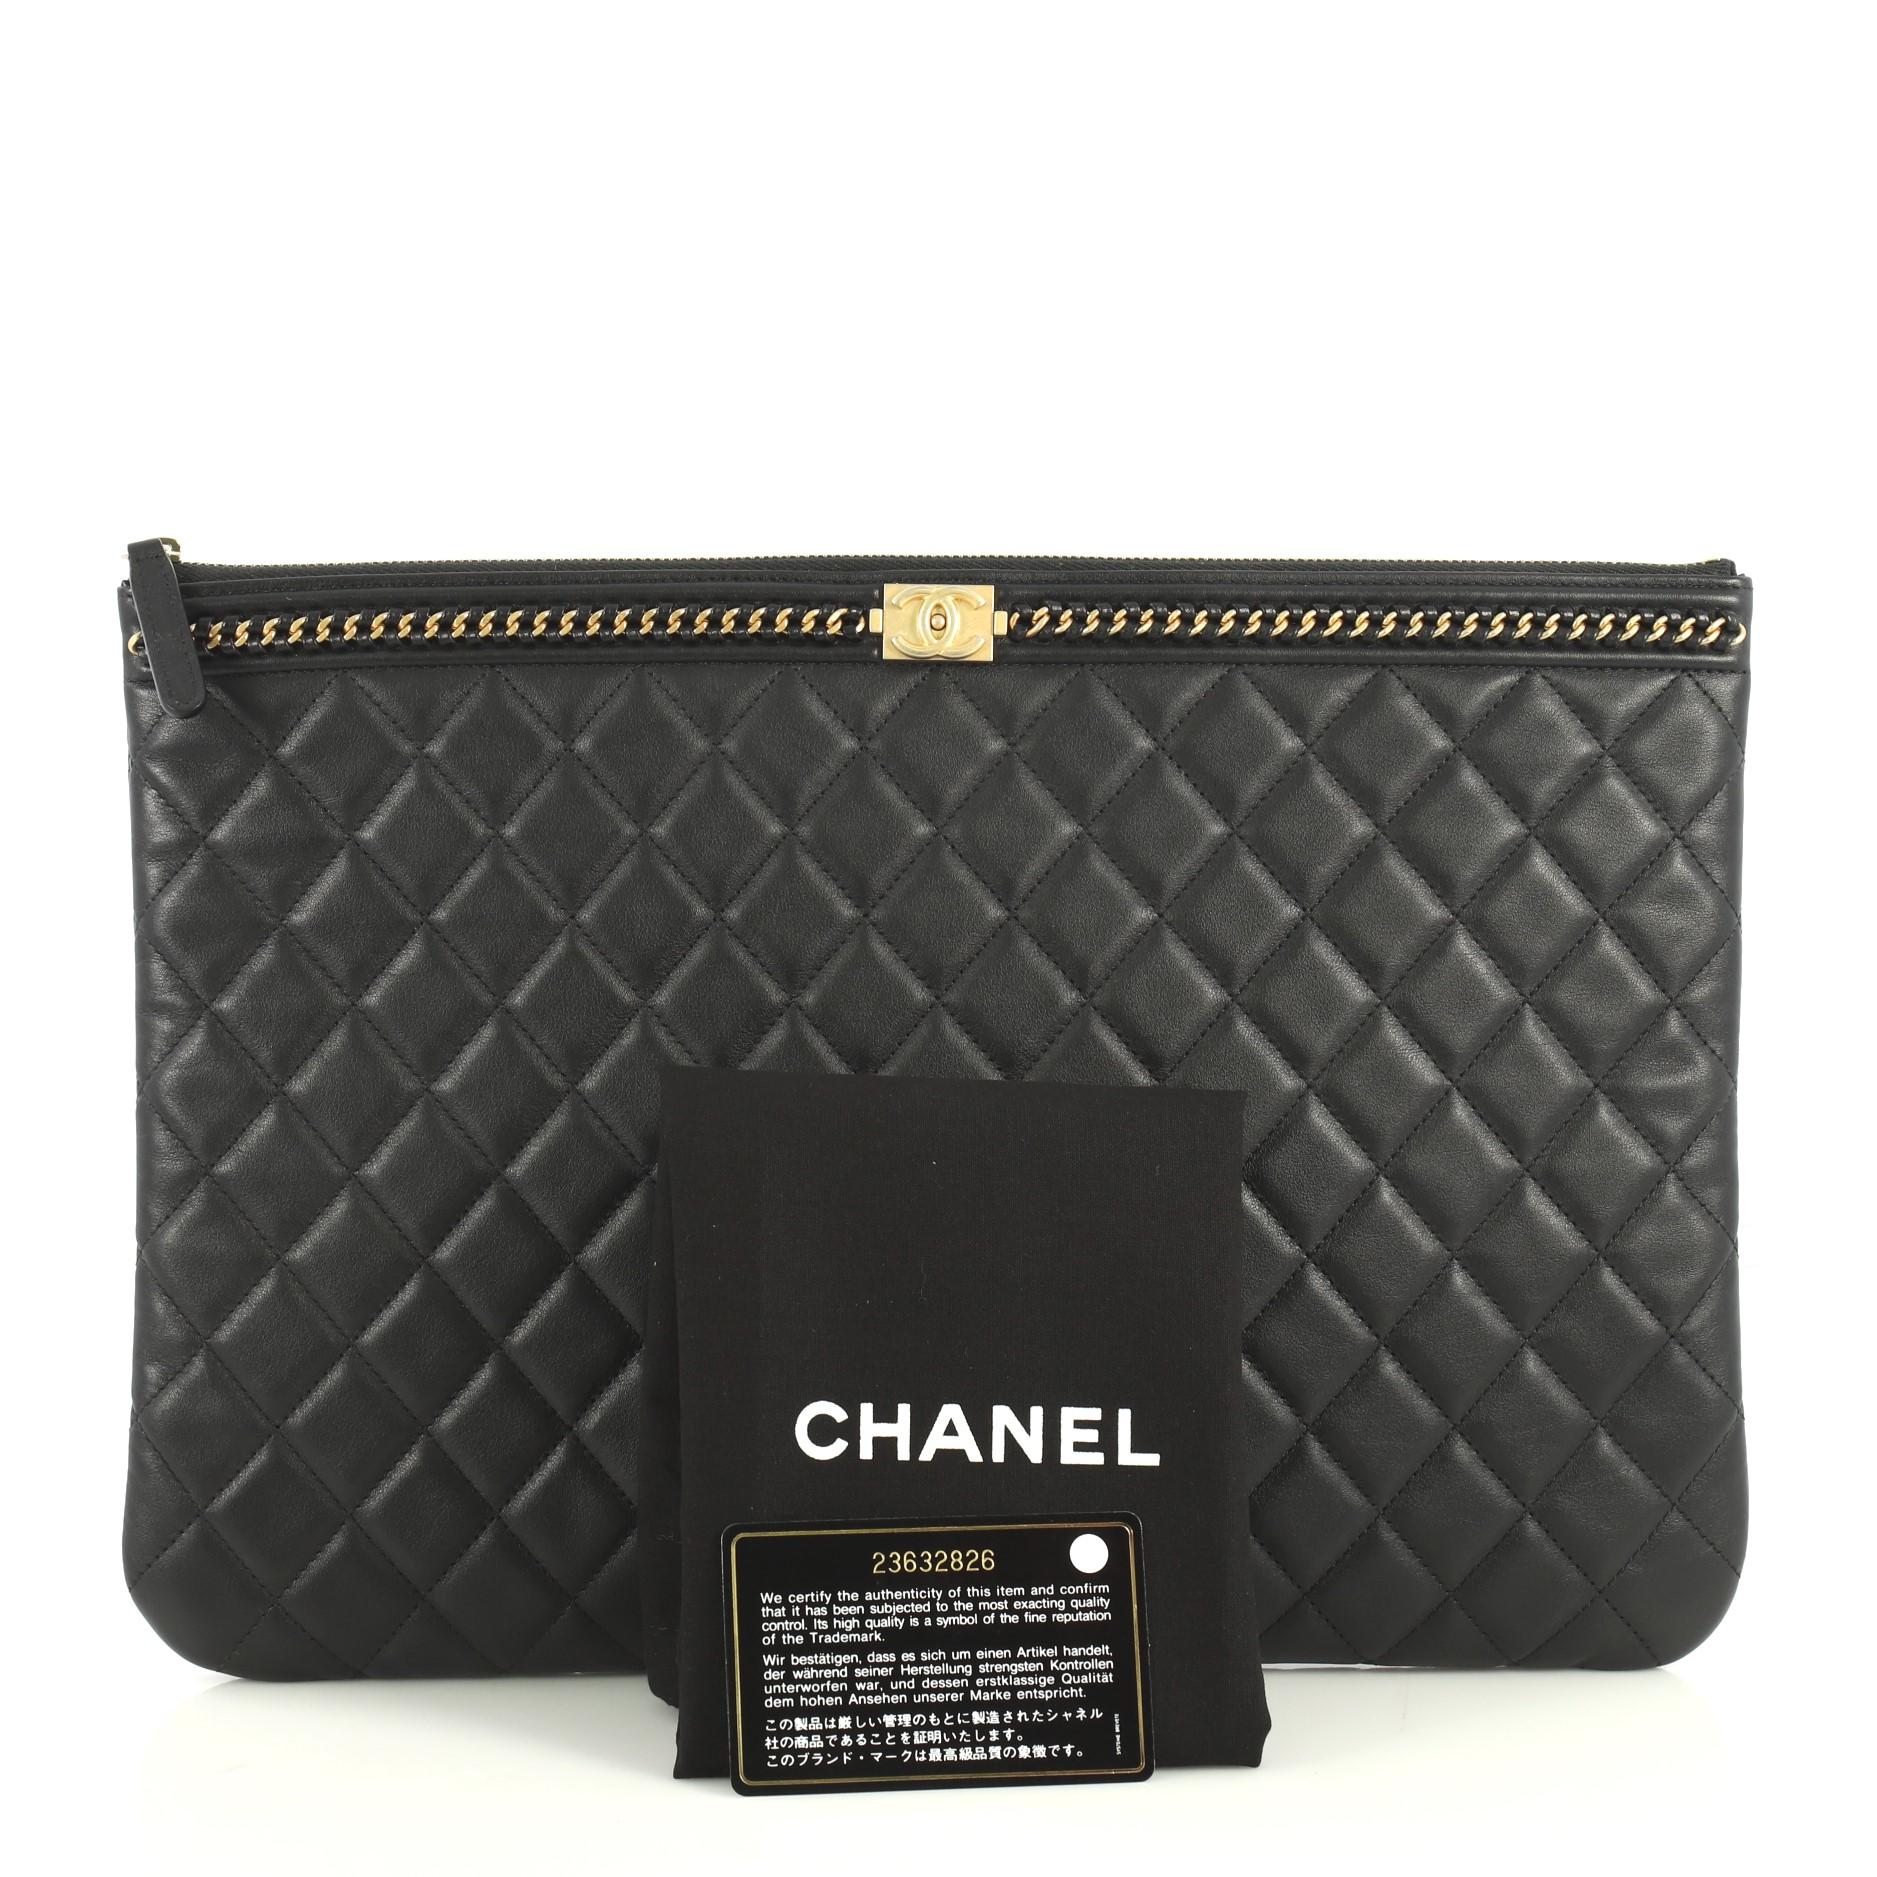 This Chanel Boy O Case Clutch Quilted Lambskin with Chain Detail Large, crafted from black quilted lambskin leather, features chain detail on top border, Chanel boy logo press lock, and gold-tone hardware. Its zip closure opens to a black nylon